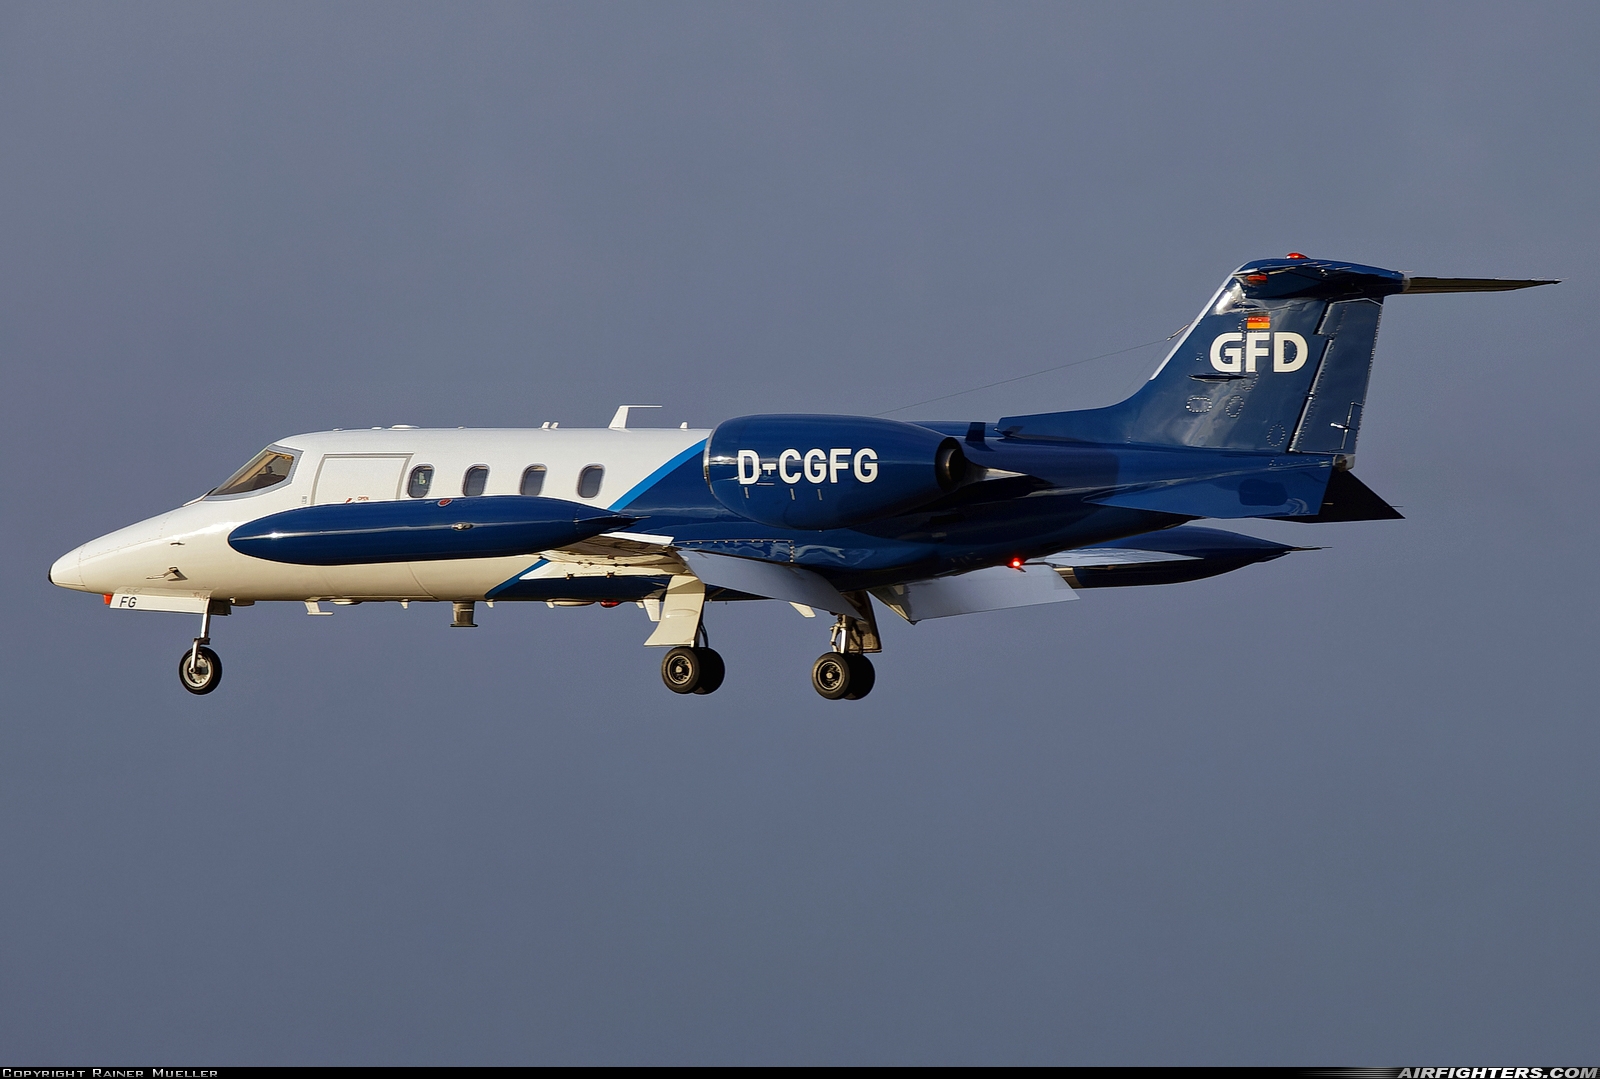 Company Owned - GFD Learjet 35A D-CGFG at Wunstorf (ETNW), Germany